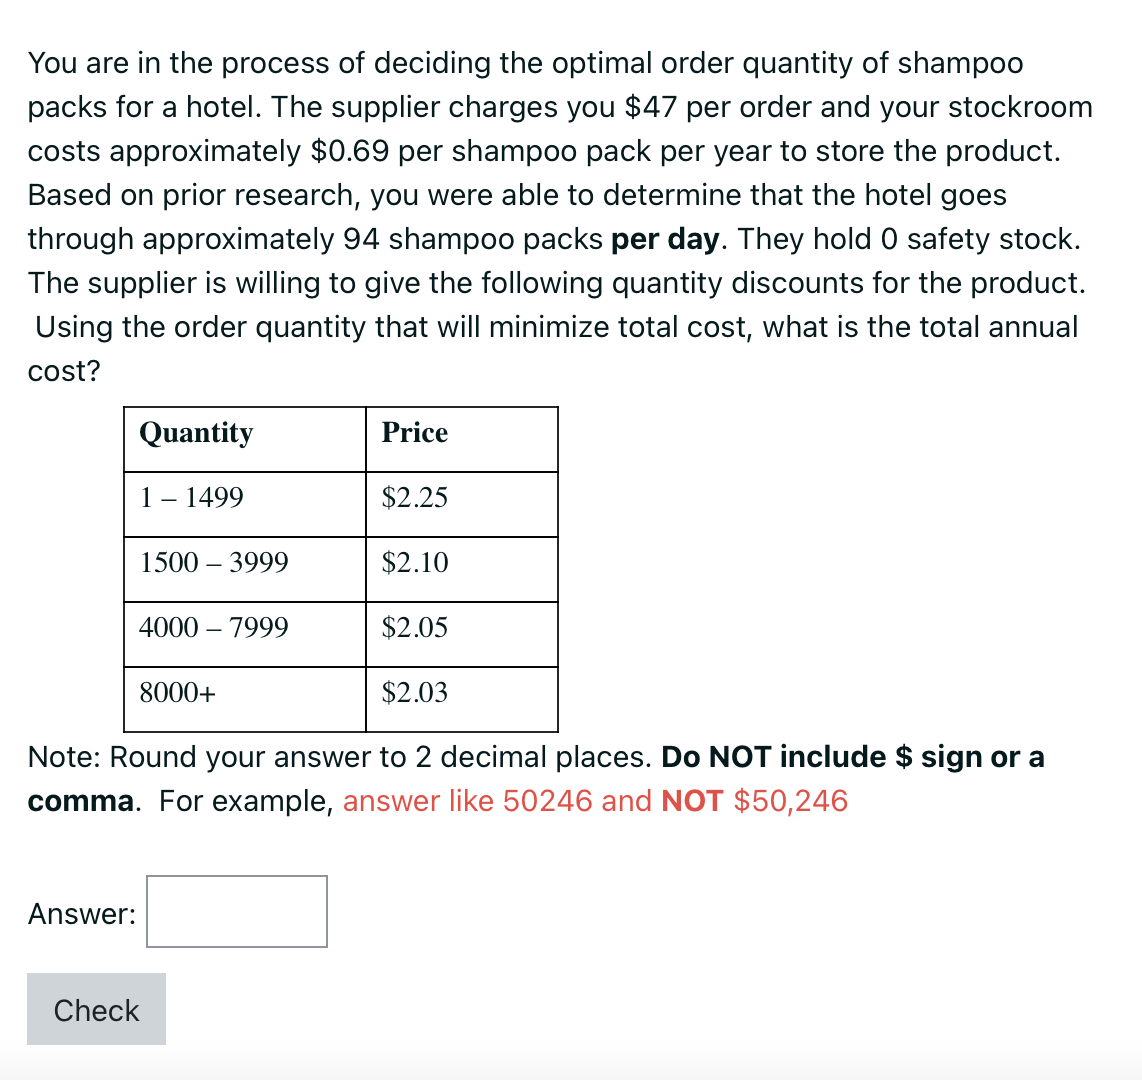 You are in the process of deciding the optimal order quantity of shampoo
packs for a hotel. The supplier charges you $47 per order and your stockroom
costs approximately $0.69 per shampoo pack per year to store the product.
Based on prior research, you were able to determine that the hotel goes
through approximately 94 shampoo packs per day. They hold 0 safety stock.
The supplier is willing to give the following quantity discounts for the product.
Using the order quantity that will minimize total cost, what is the total annual
cost?
Quantity
1 - 1499
$2.25
$2.10
$2.05
$2.03
Note: Round your answer to 2 decimal places. Do NOT include $ sign or a
comma. For example, answer like 50246 and NOT $50,246
Answer:
1500 - 3999
4000 - 7999
8000+
Price
Check